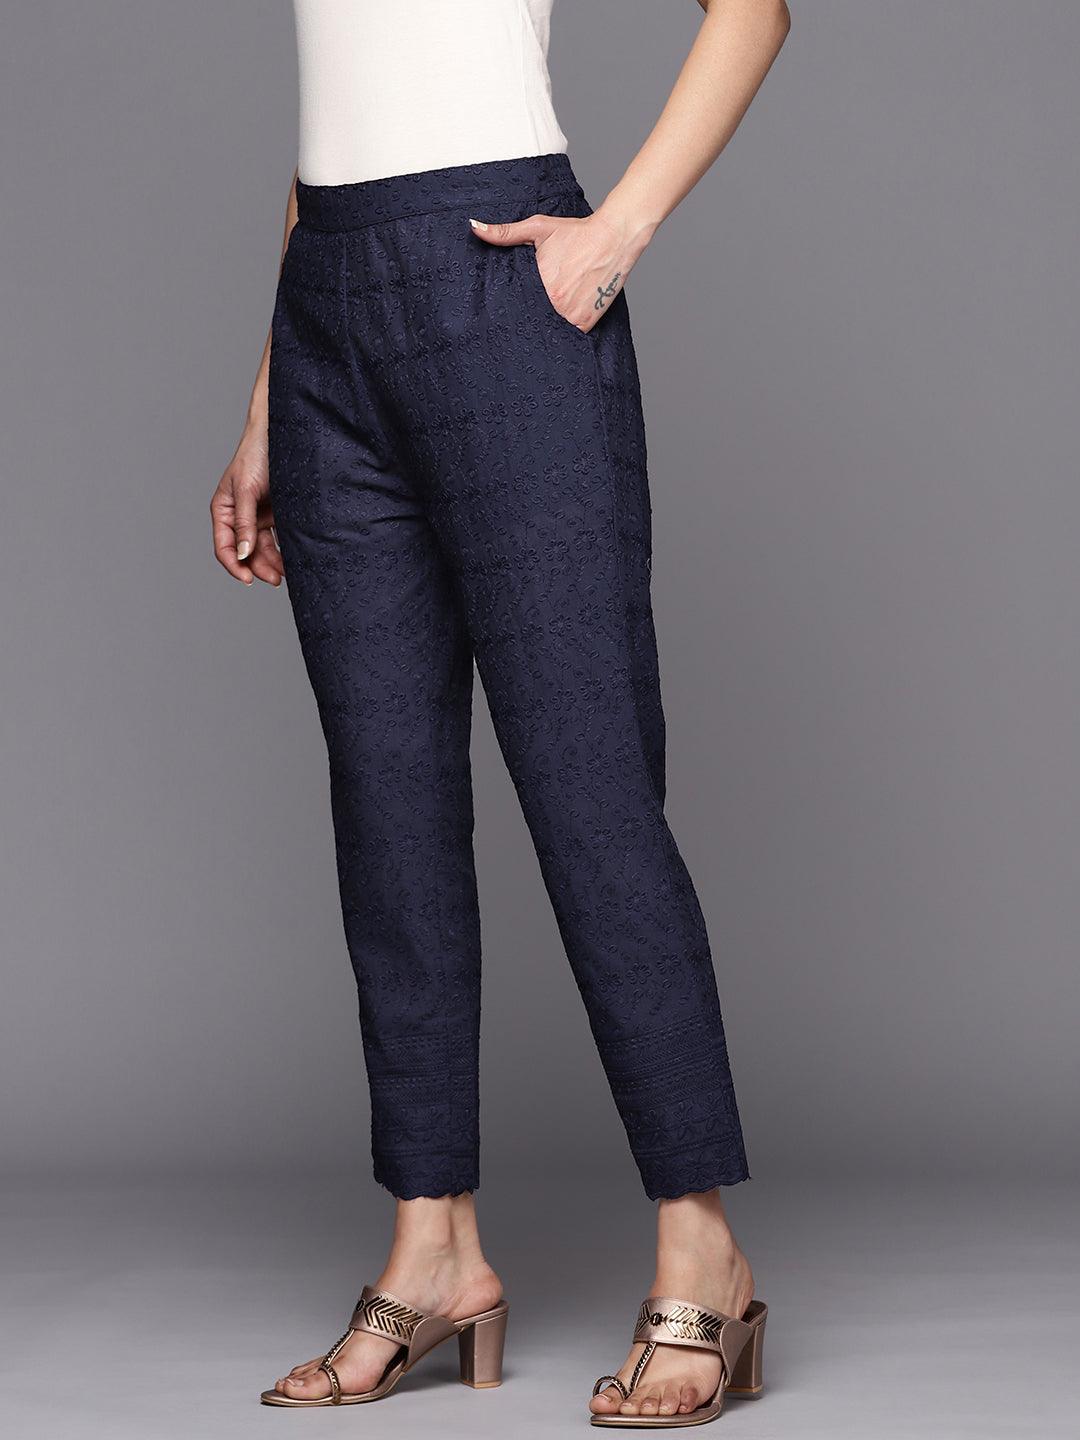 Navy Blue Embroidered Cotton Trousers - Libas